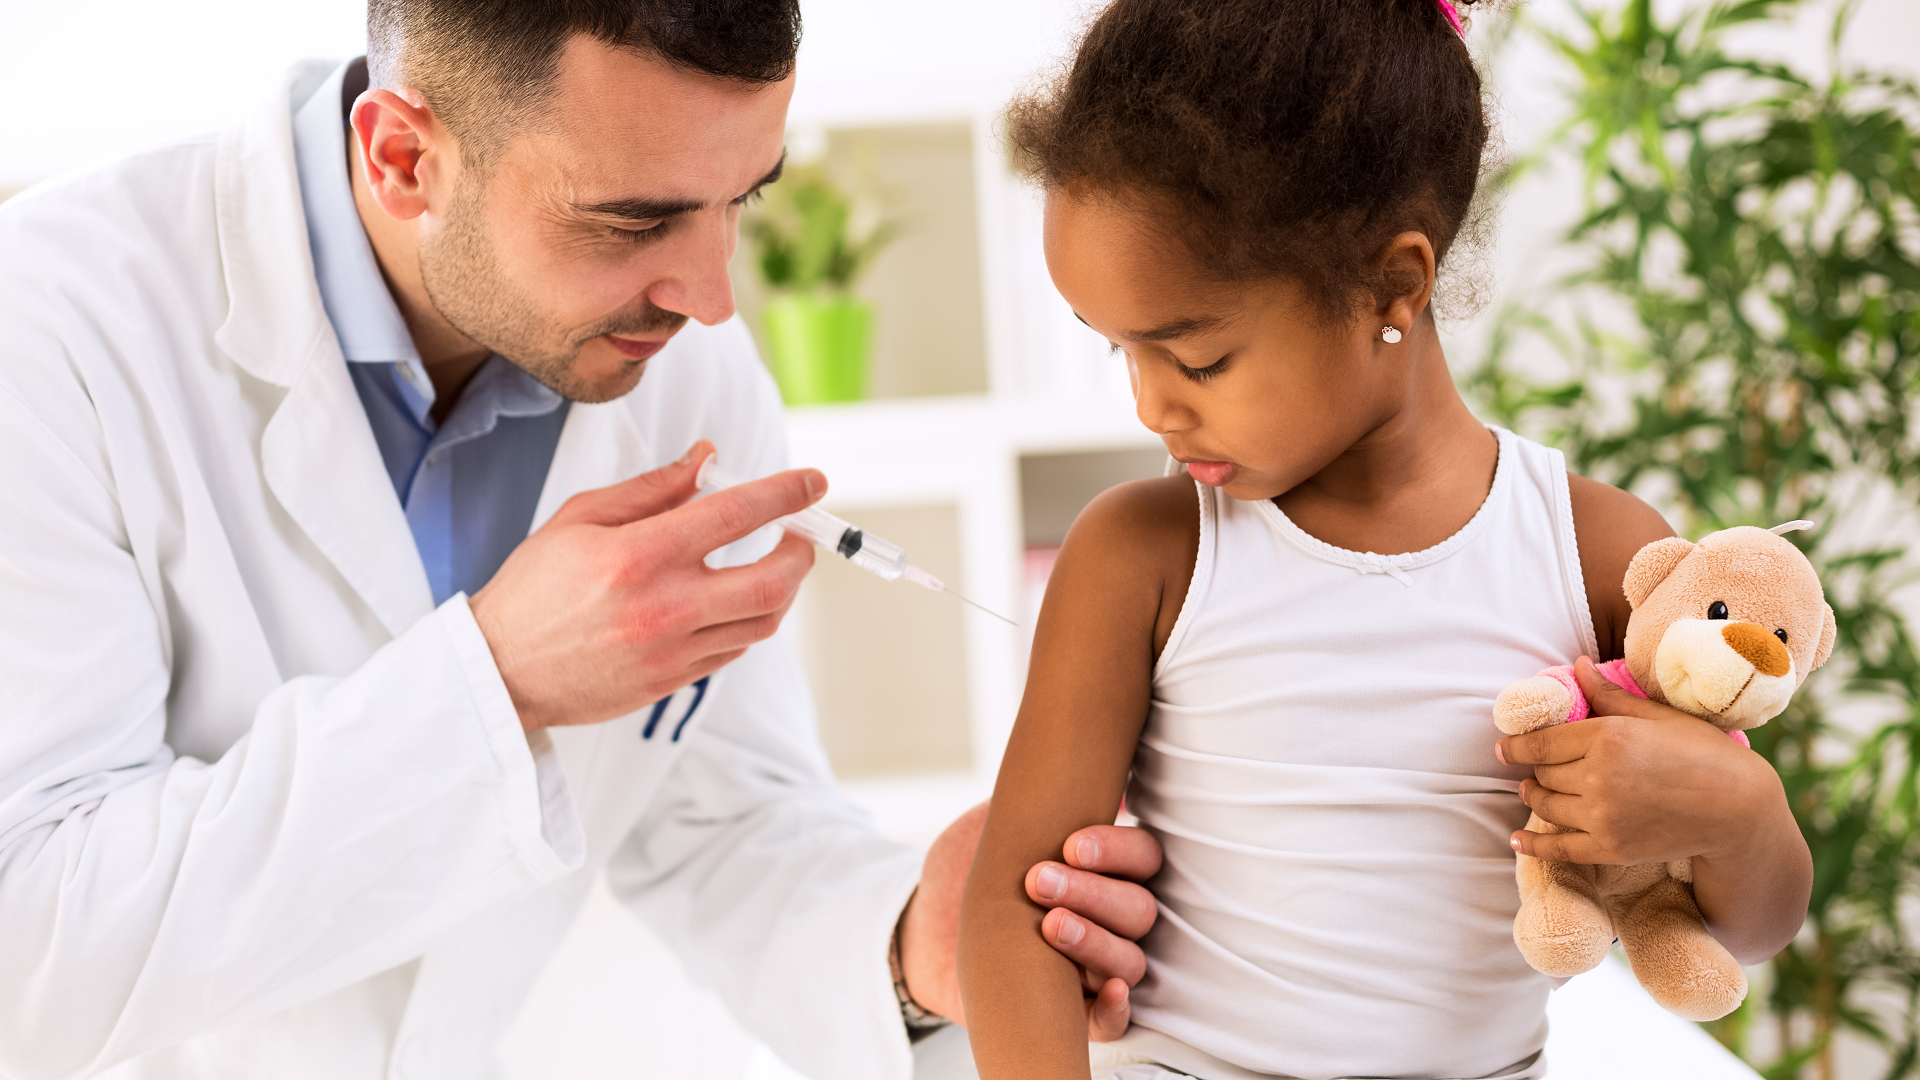 It's important to keep track of immunizations, including those recommended for kids entering high school or college. Sponsored by Premera Blue Cross.